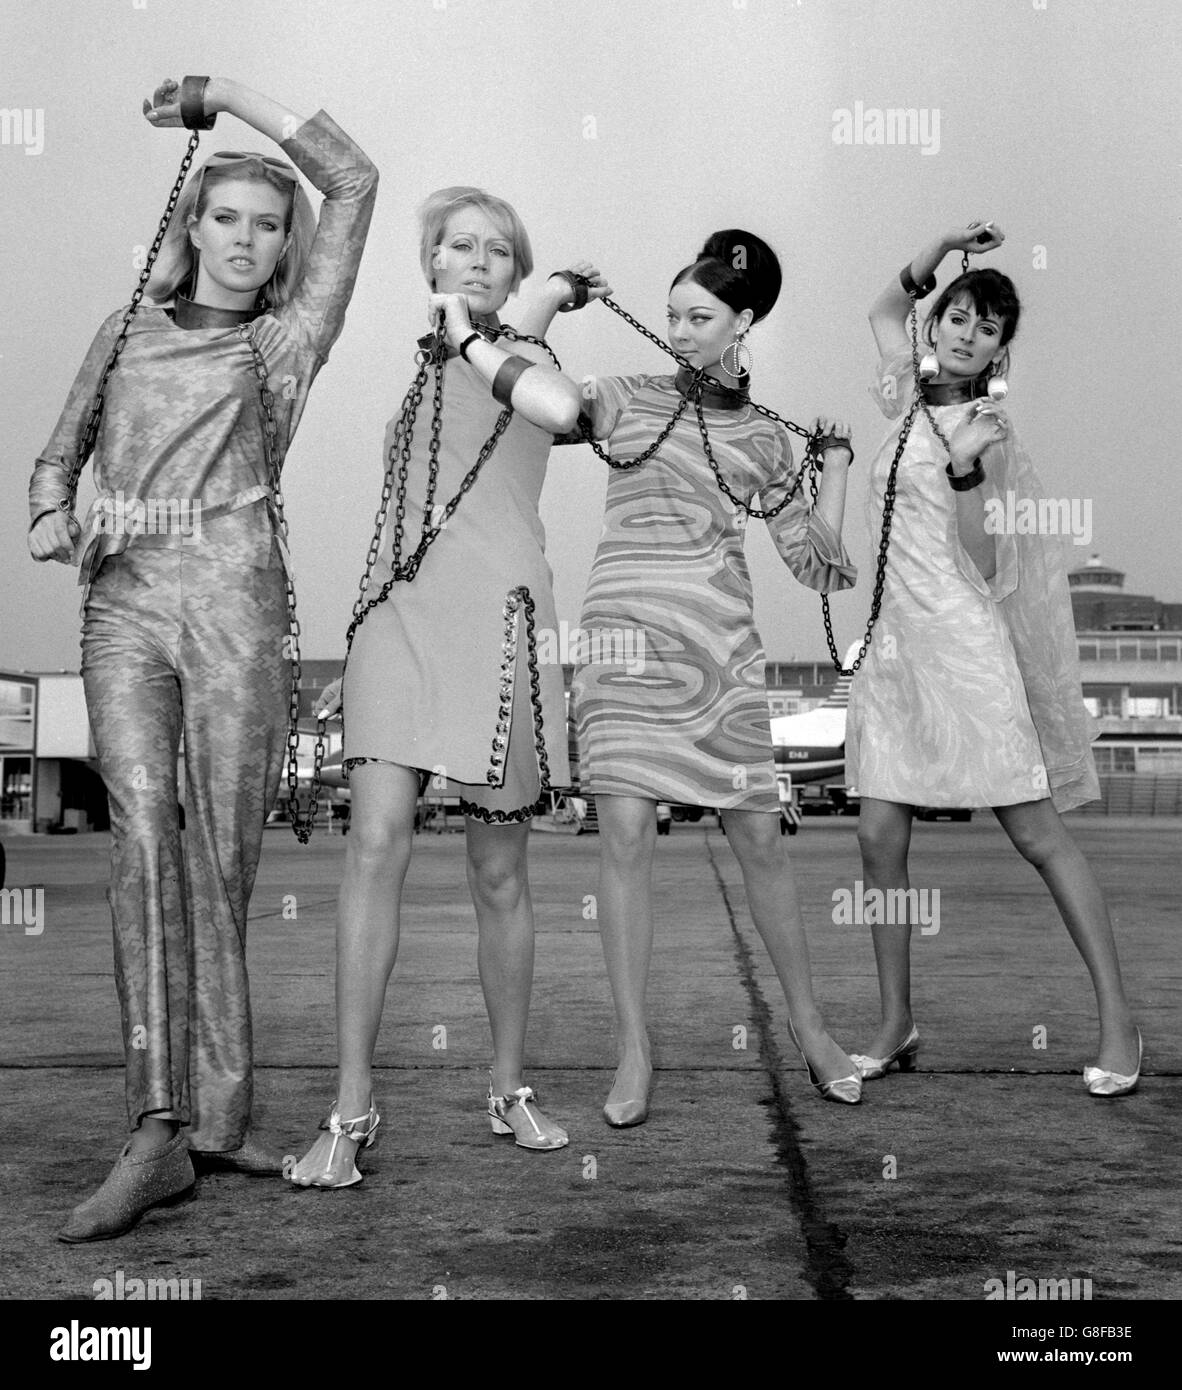 Models 'shackled in chains' at London Airport when they left for the Tunisian markets, where the dresses are to be auctioned. The idea was a sales gimmick by Berkertex, the London Fashion House, to bring notice of their export drive to the North African markets. The models are (l-r) Maureen Walker, Sue Burgess, Marianne Lise and Julia Phillips. Stock Photo